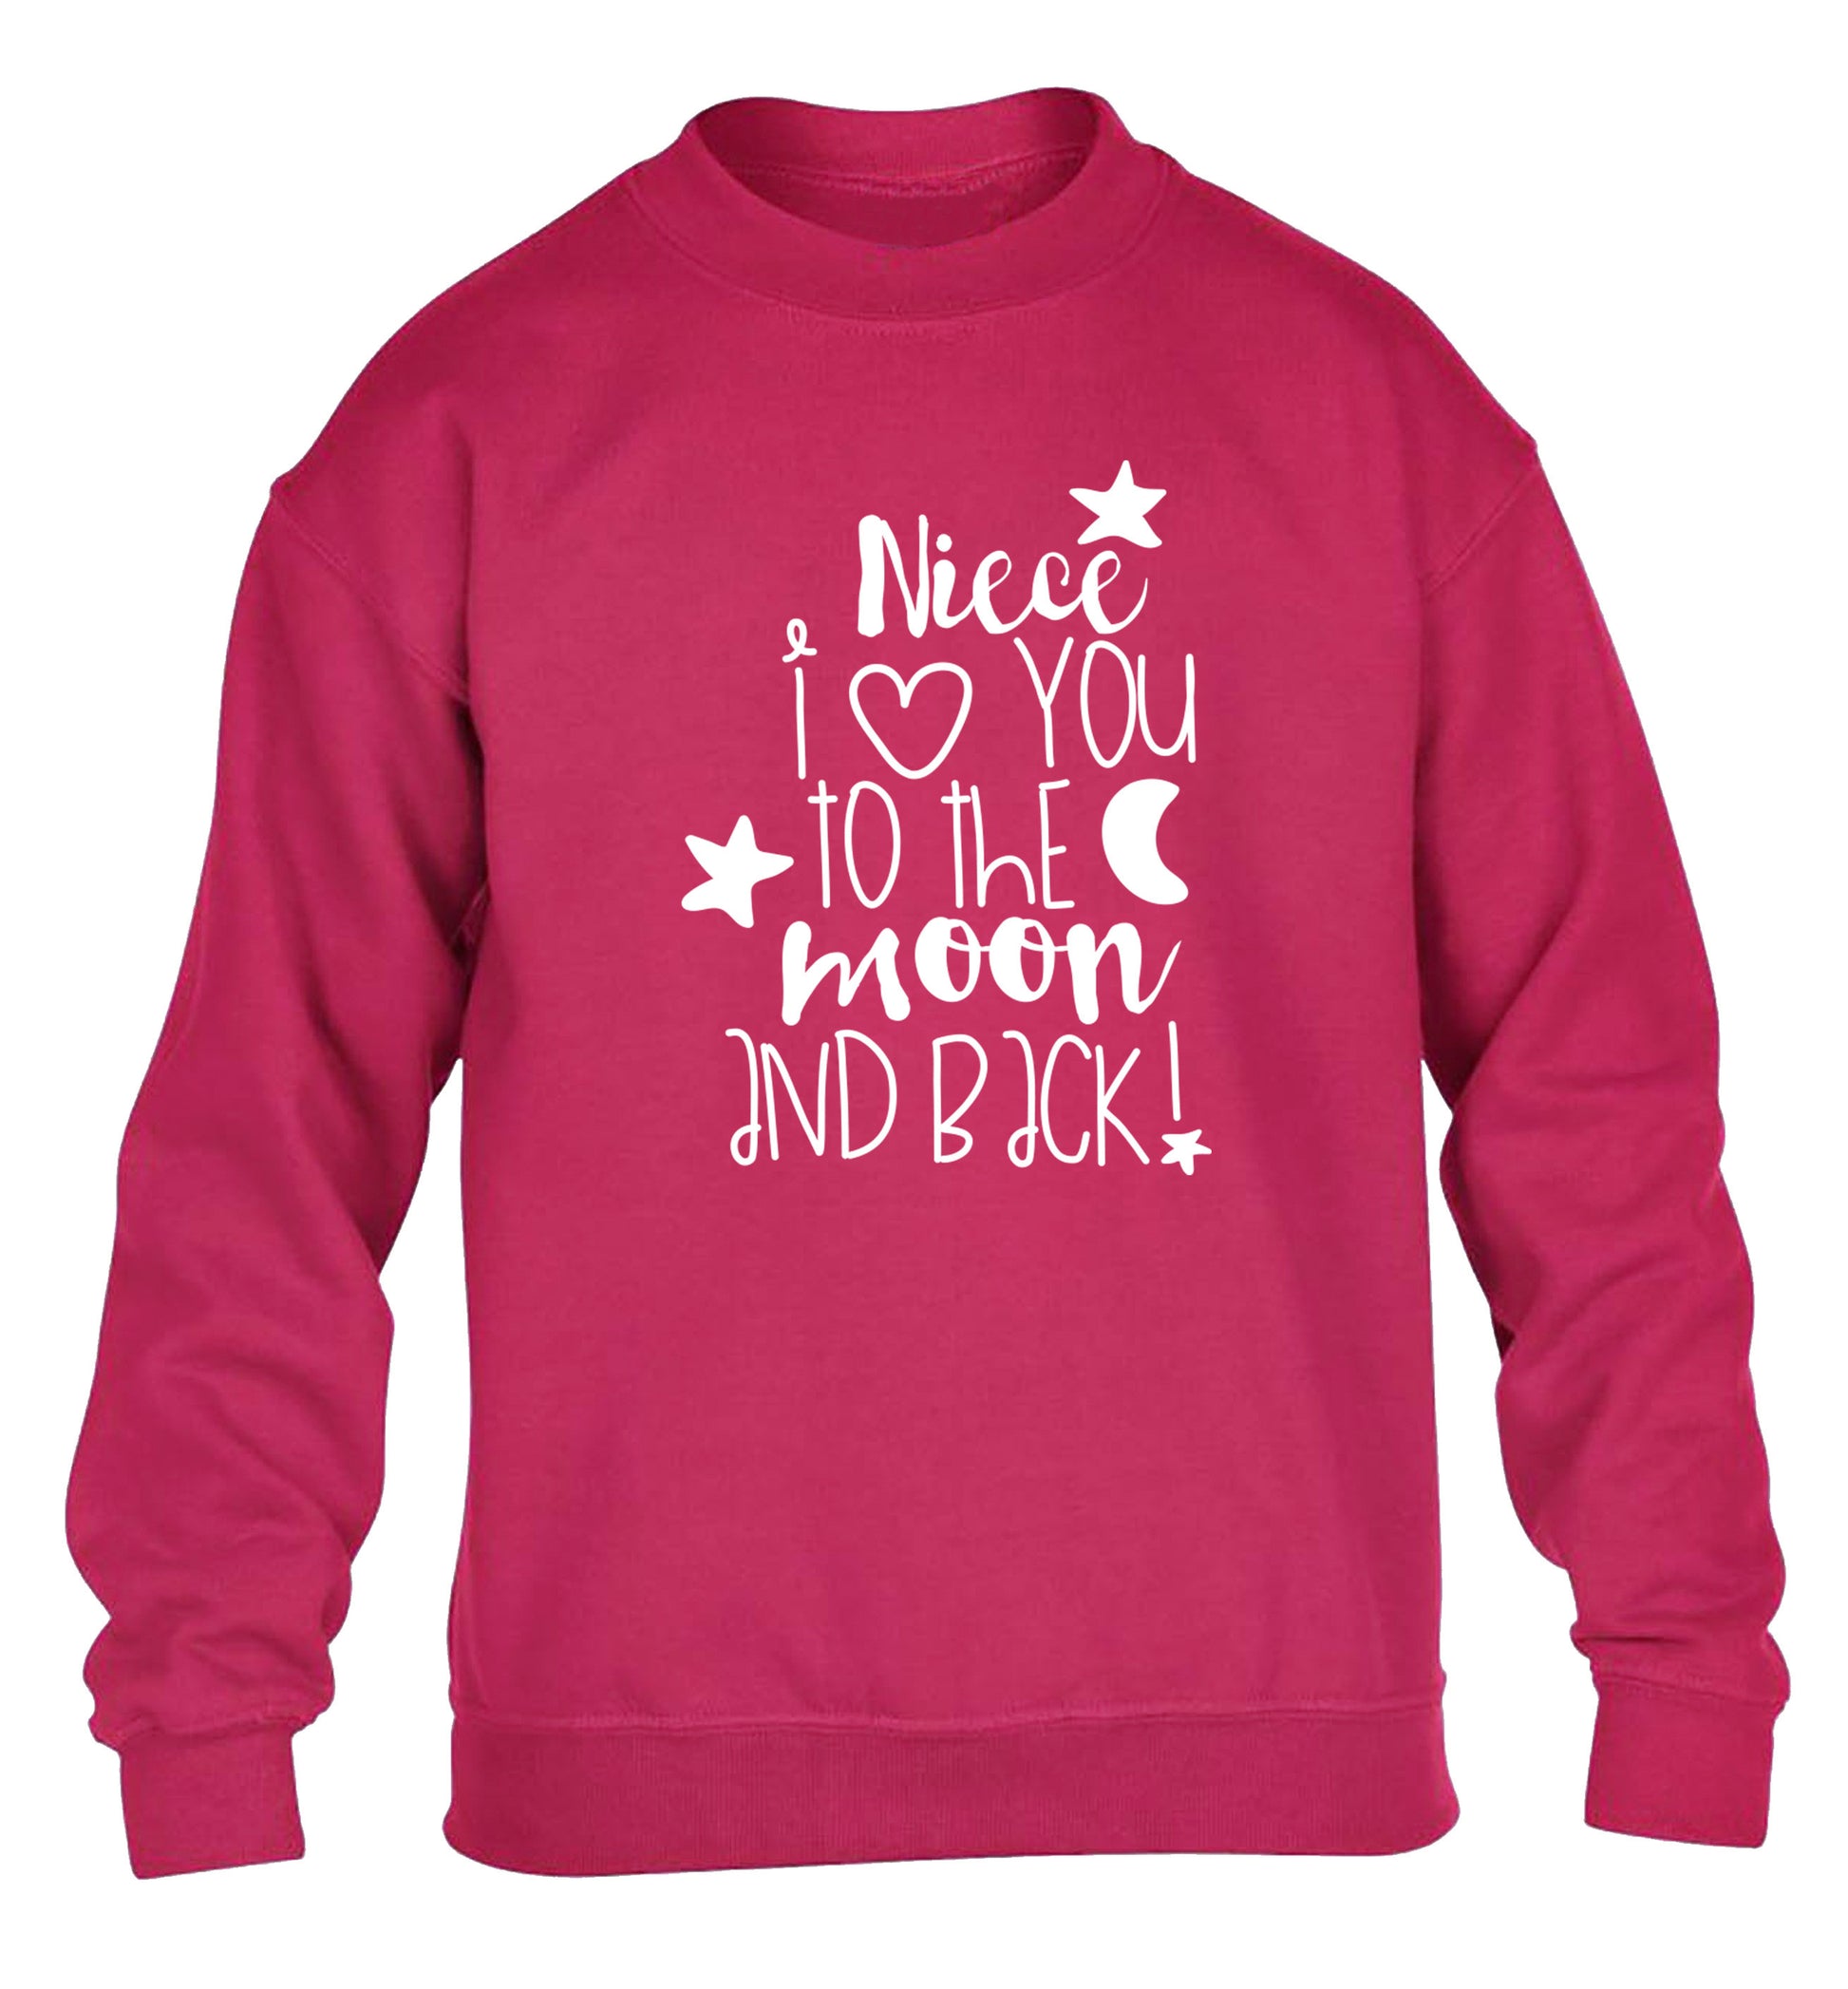 Niece I love you to the moon and back children's pink  sweater 12-14 Years